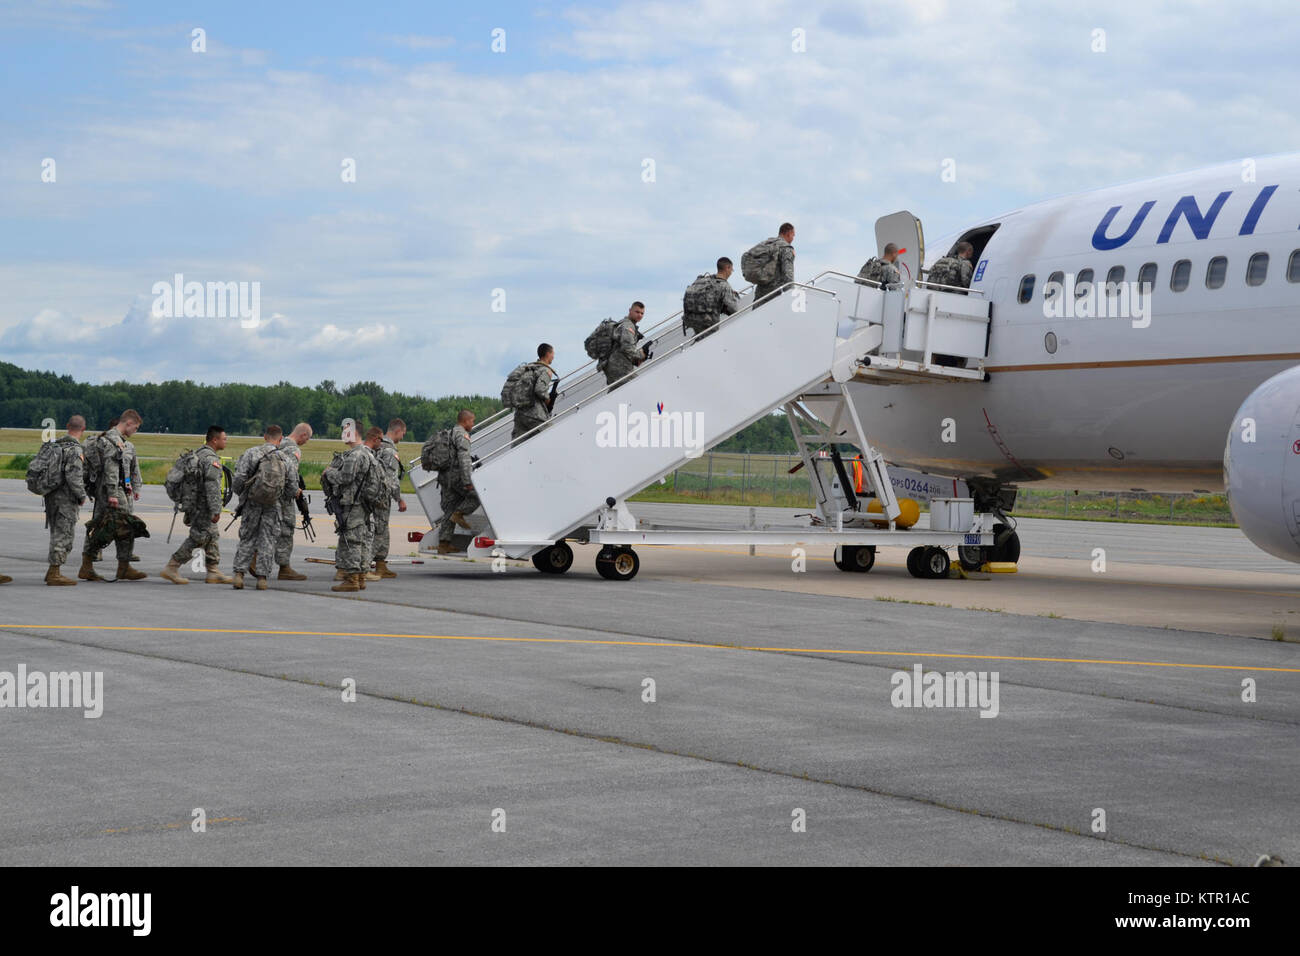 Soldiers assigned to the New York Army National Guard's 27th Infantry Brigade Combat Team board a charter aircraft on Saturday, July 9, 2016 at Hancock Field Air National Guard Base in Syracuse, N.Y. The Soldiers are heading to Fort Polk, Louisiana for a three week exercise at the Joint Readiness Training Center there. ( U.S. Air National Guard photo by Master Sgt. Eric Miller/ Released) Stock Photo